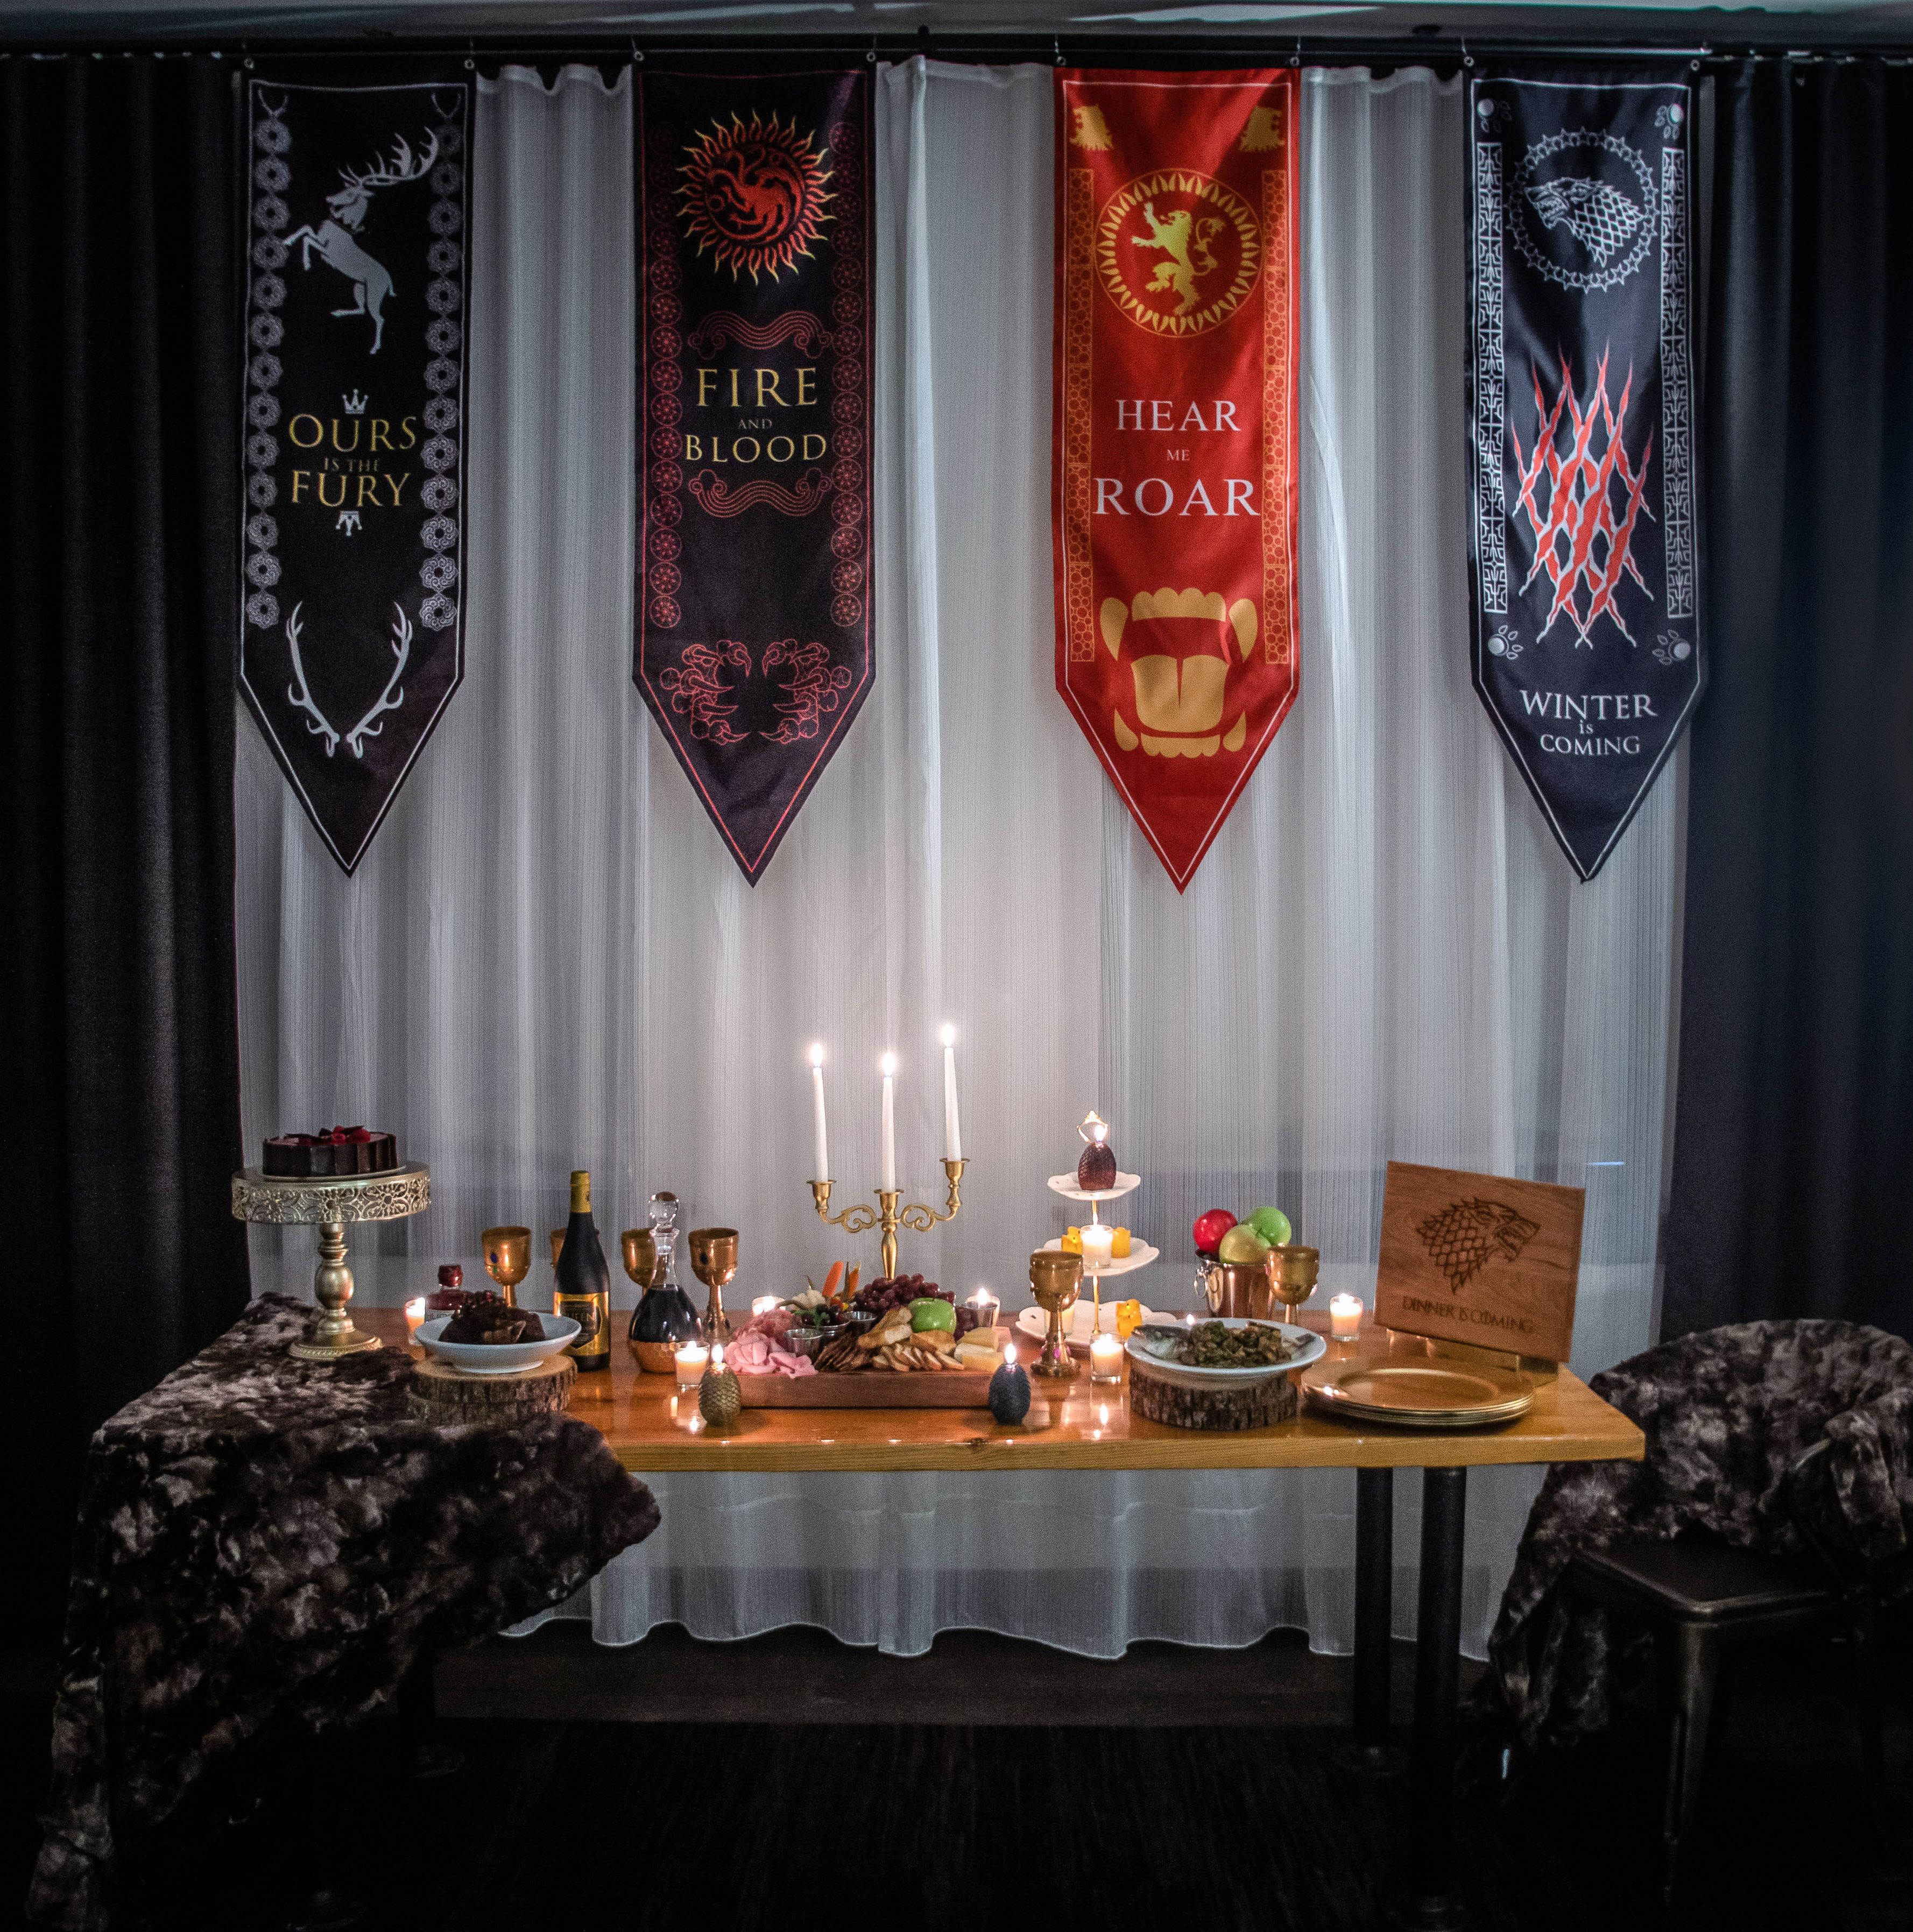 New York\'s Refinery Hotel Features a Game of Thrones-Inspired ...